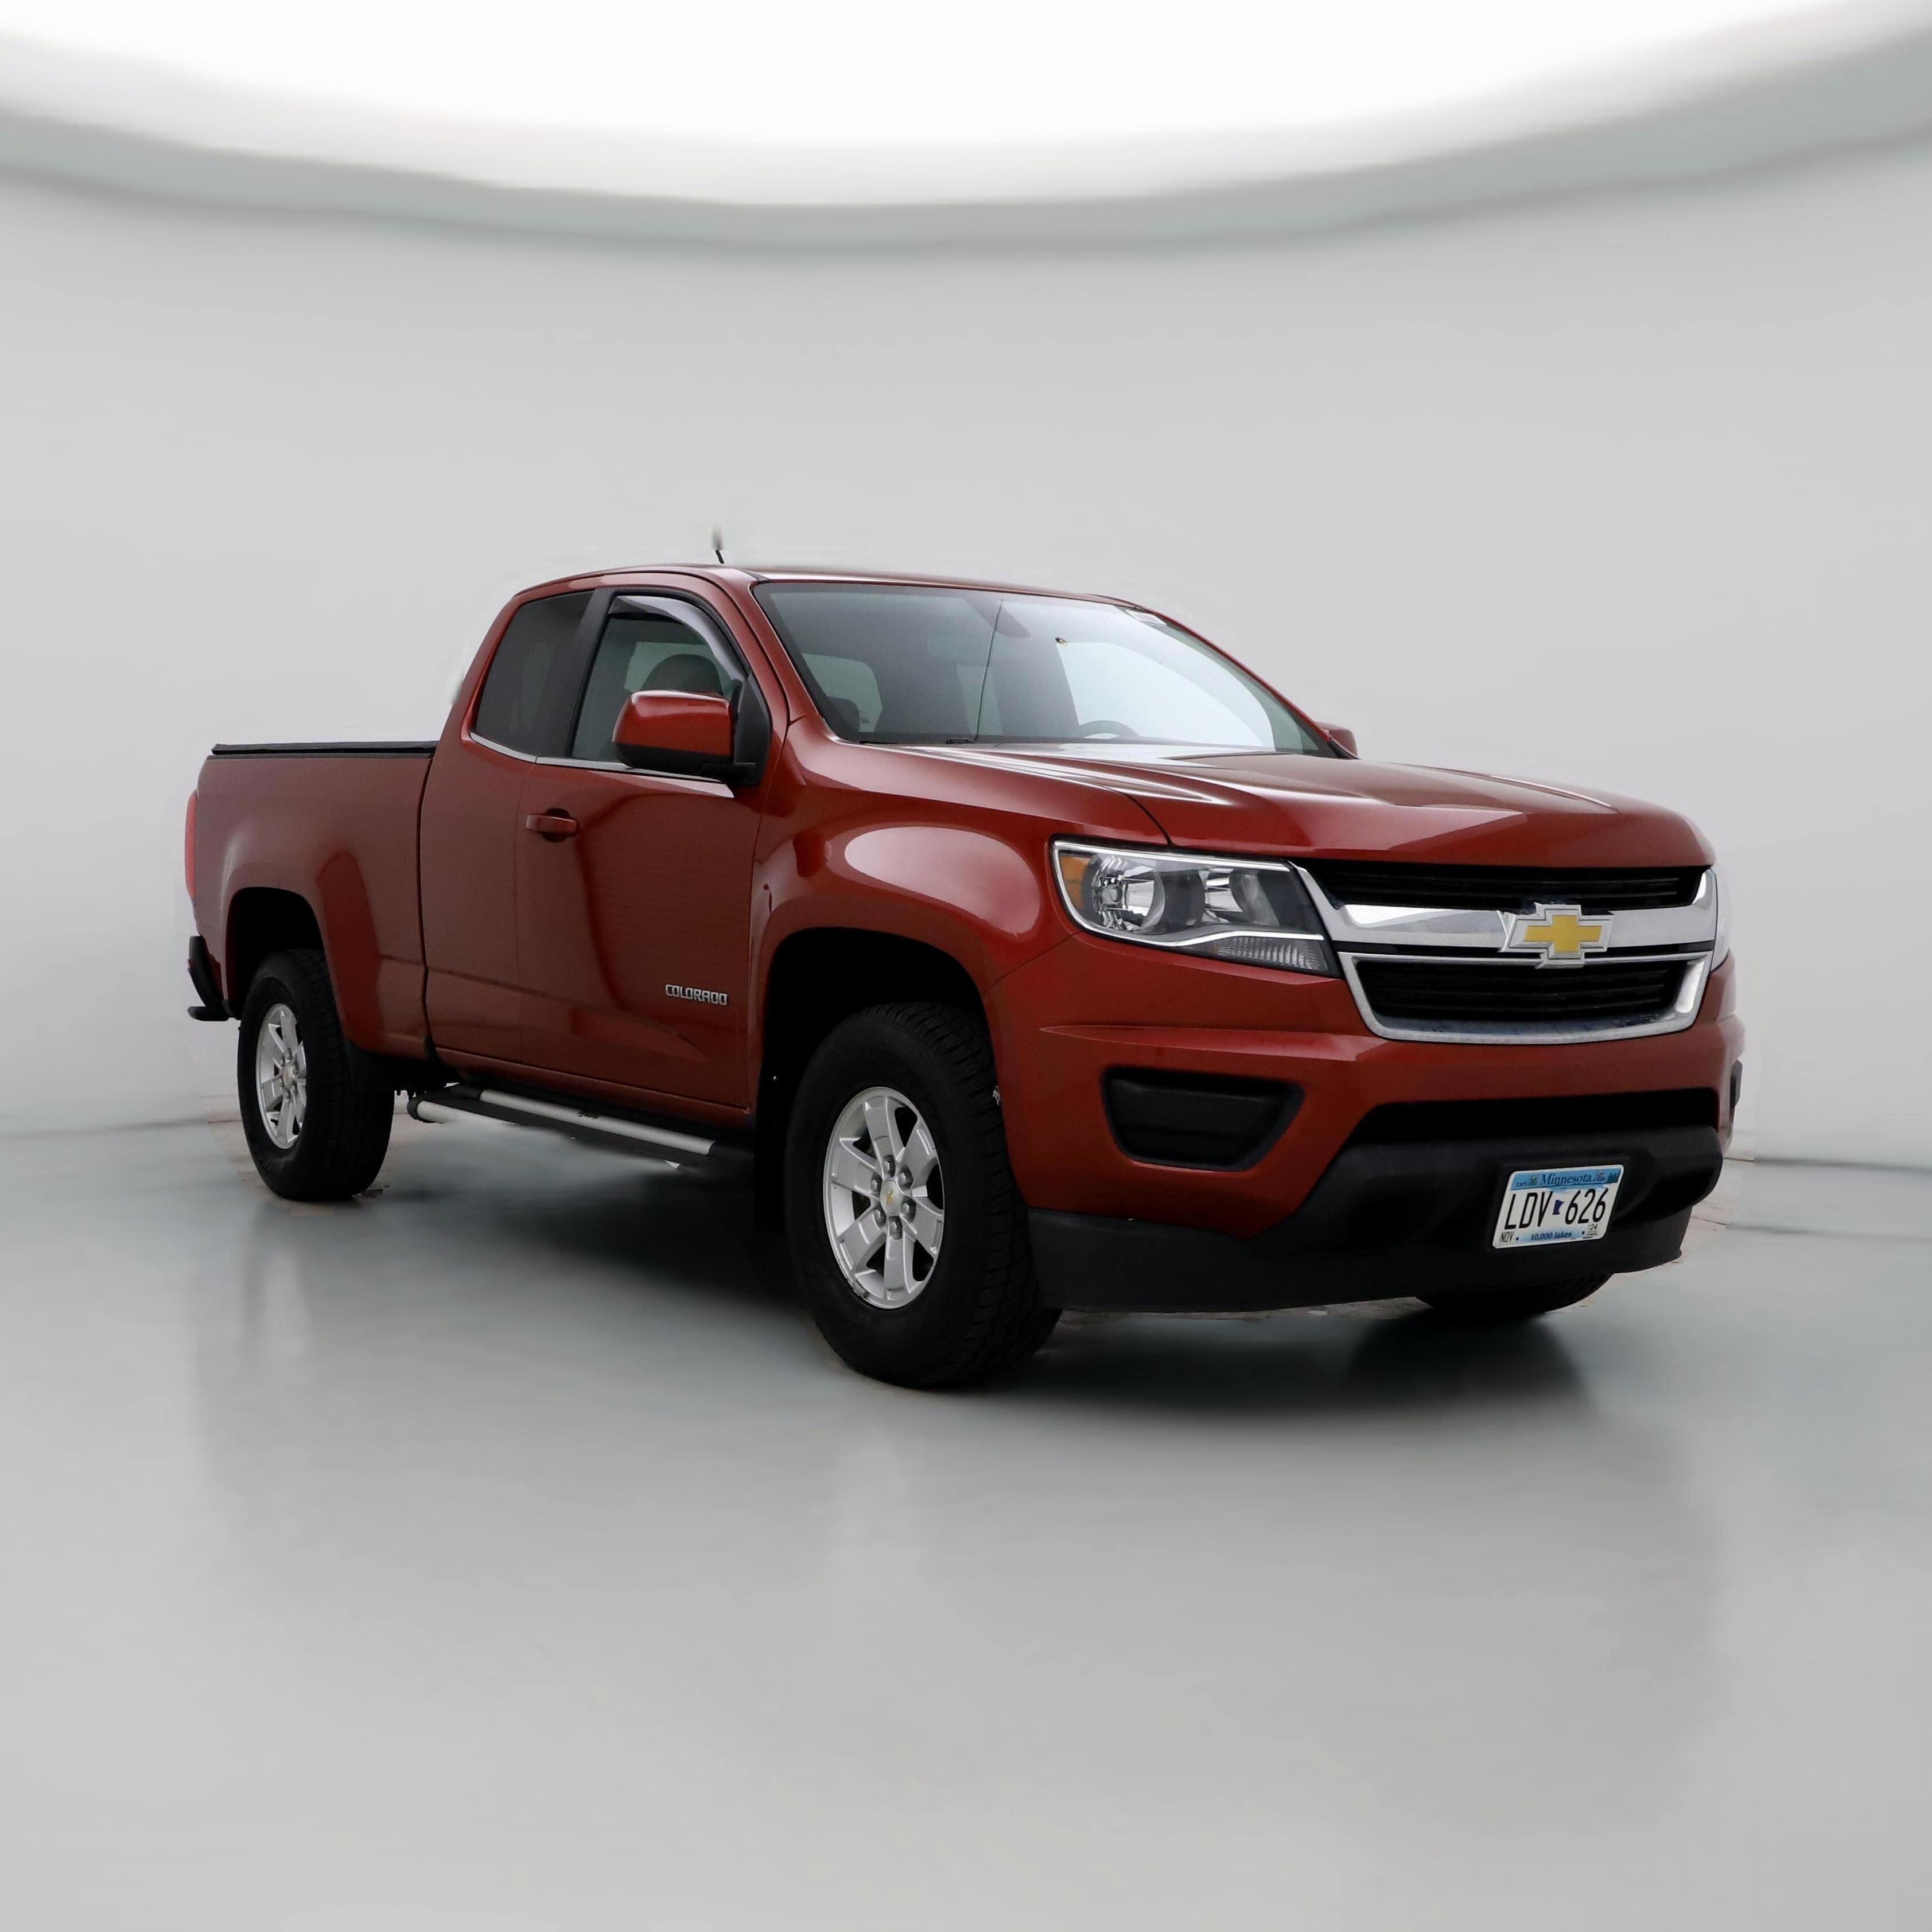 Used 2015 Chevrolet Colorado for Sale